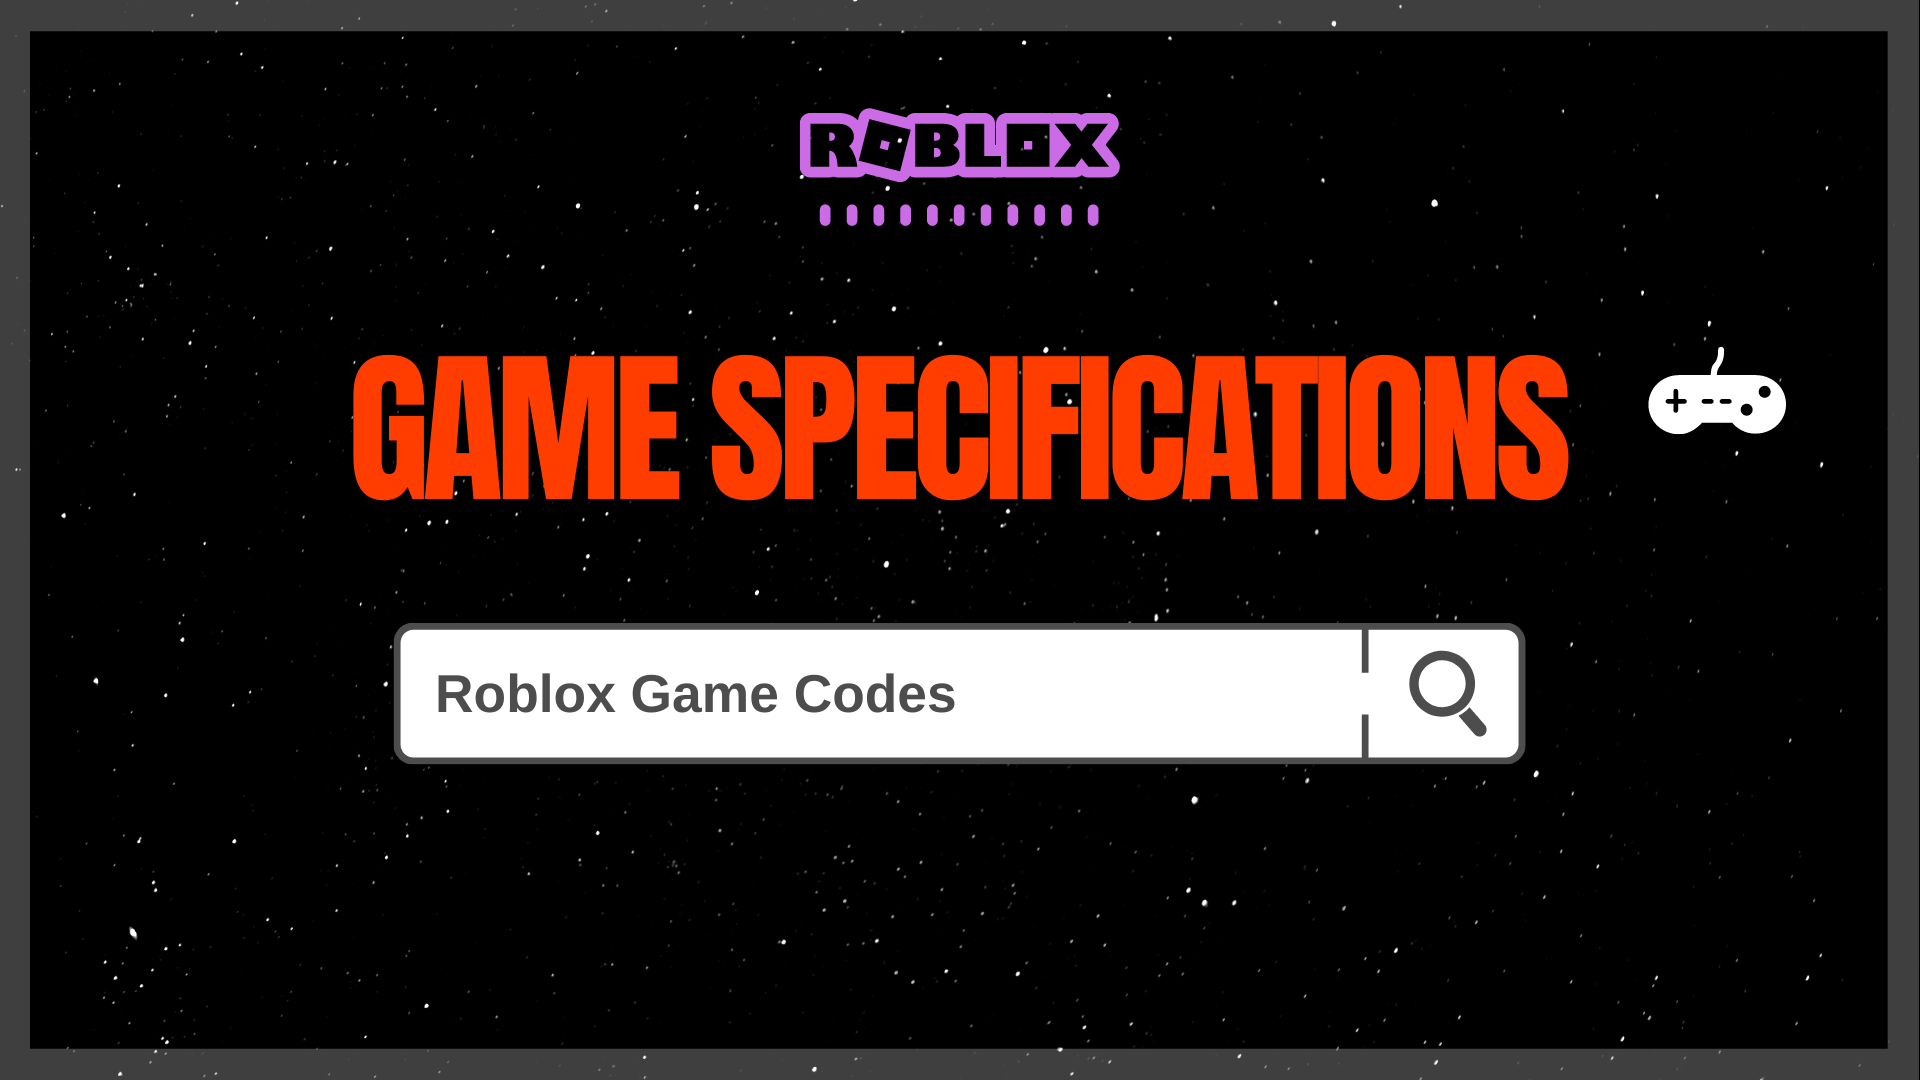 All In One Roblox Game Codes ᐈ Encylopedia Game Specifications - roblox powerful gear codes